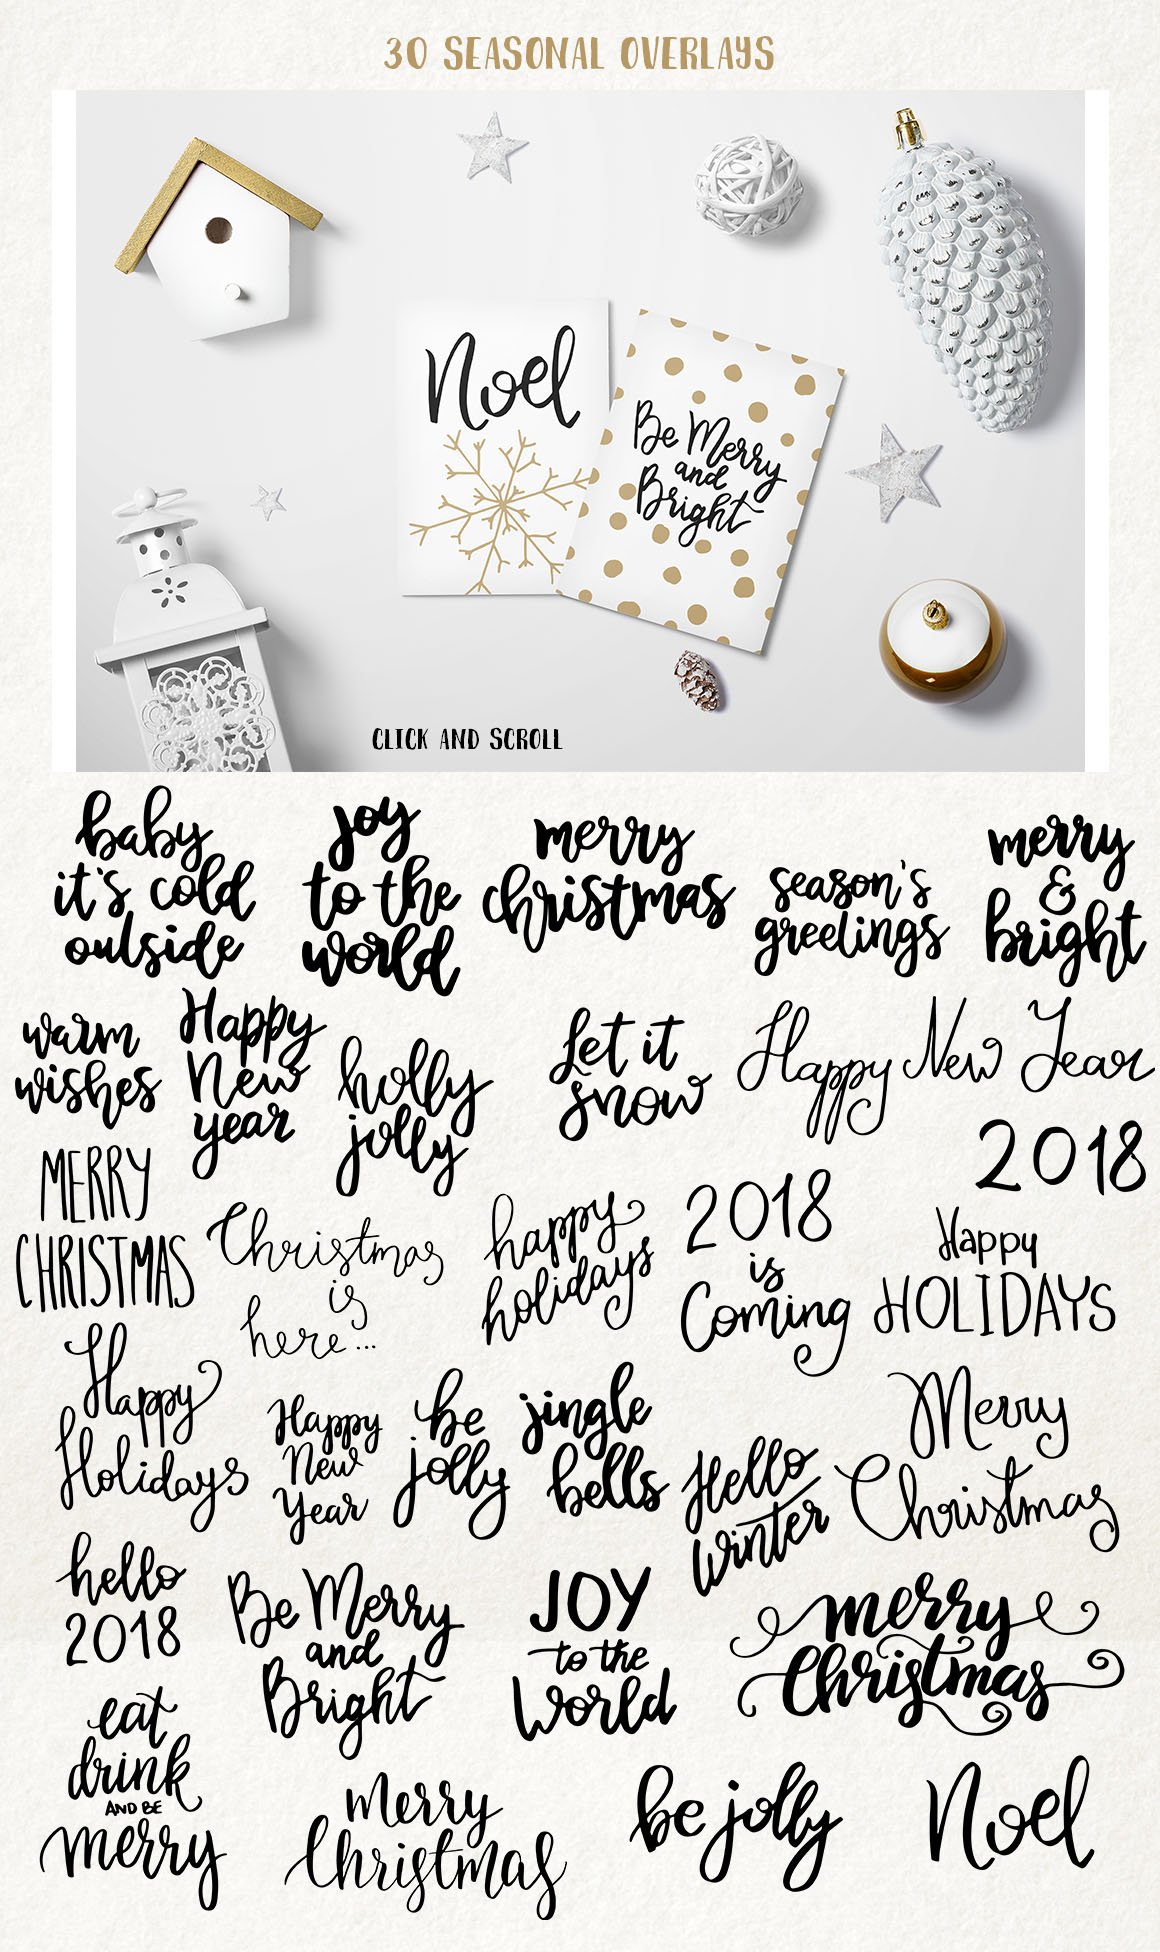 Warm Wishes Greeting Collection